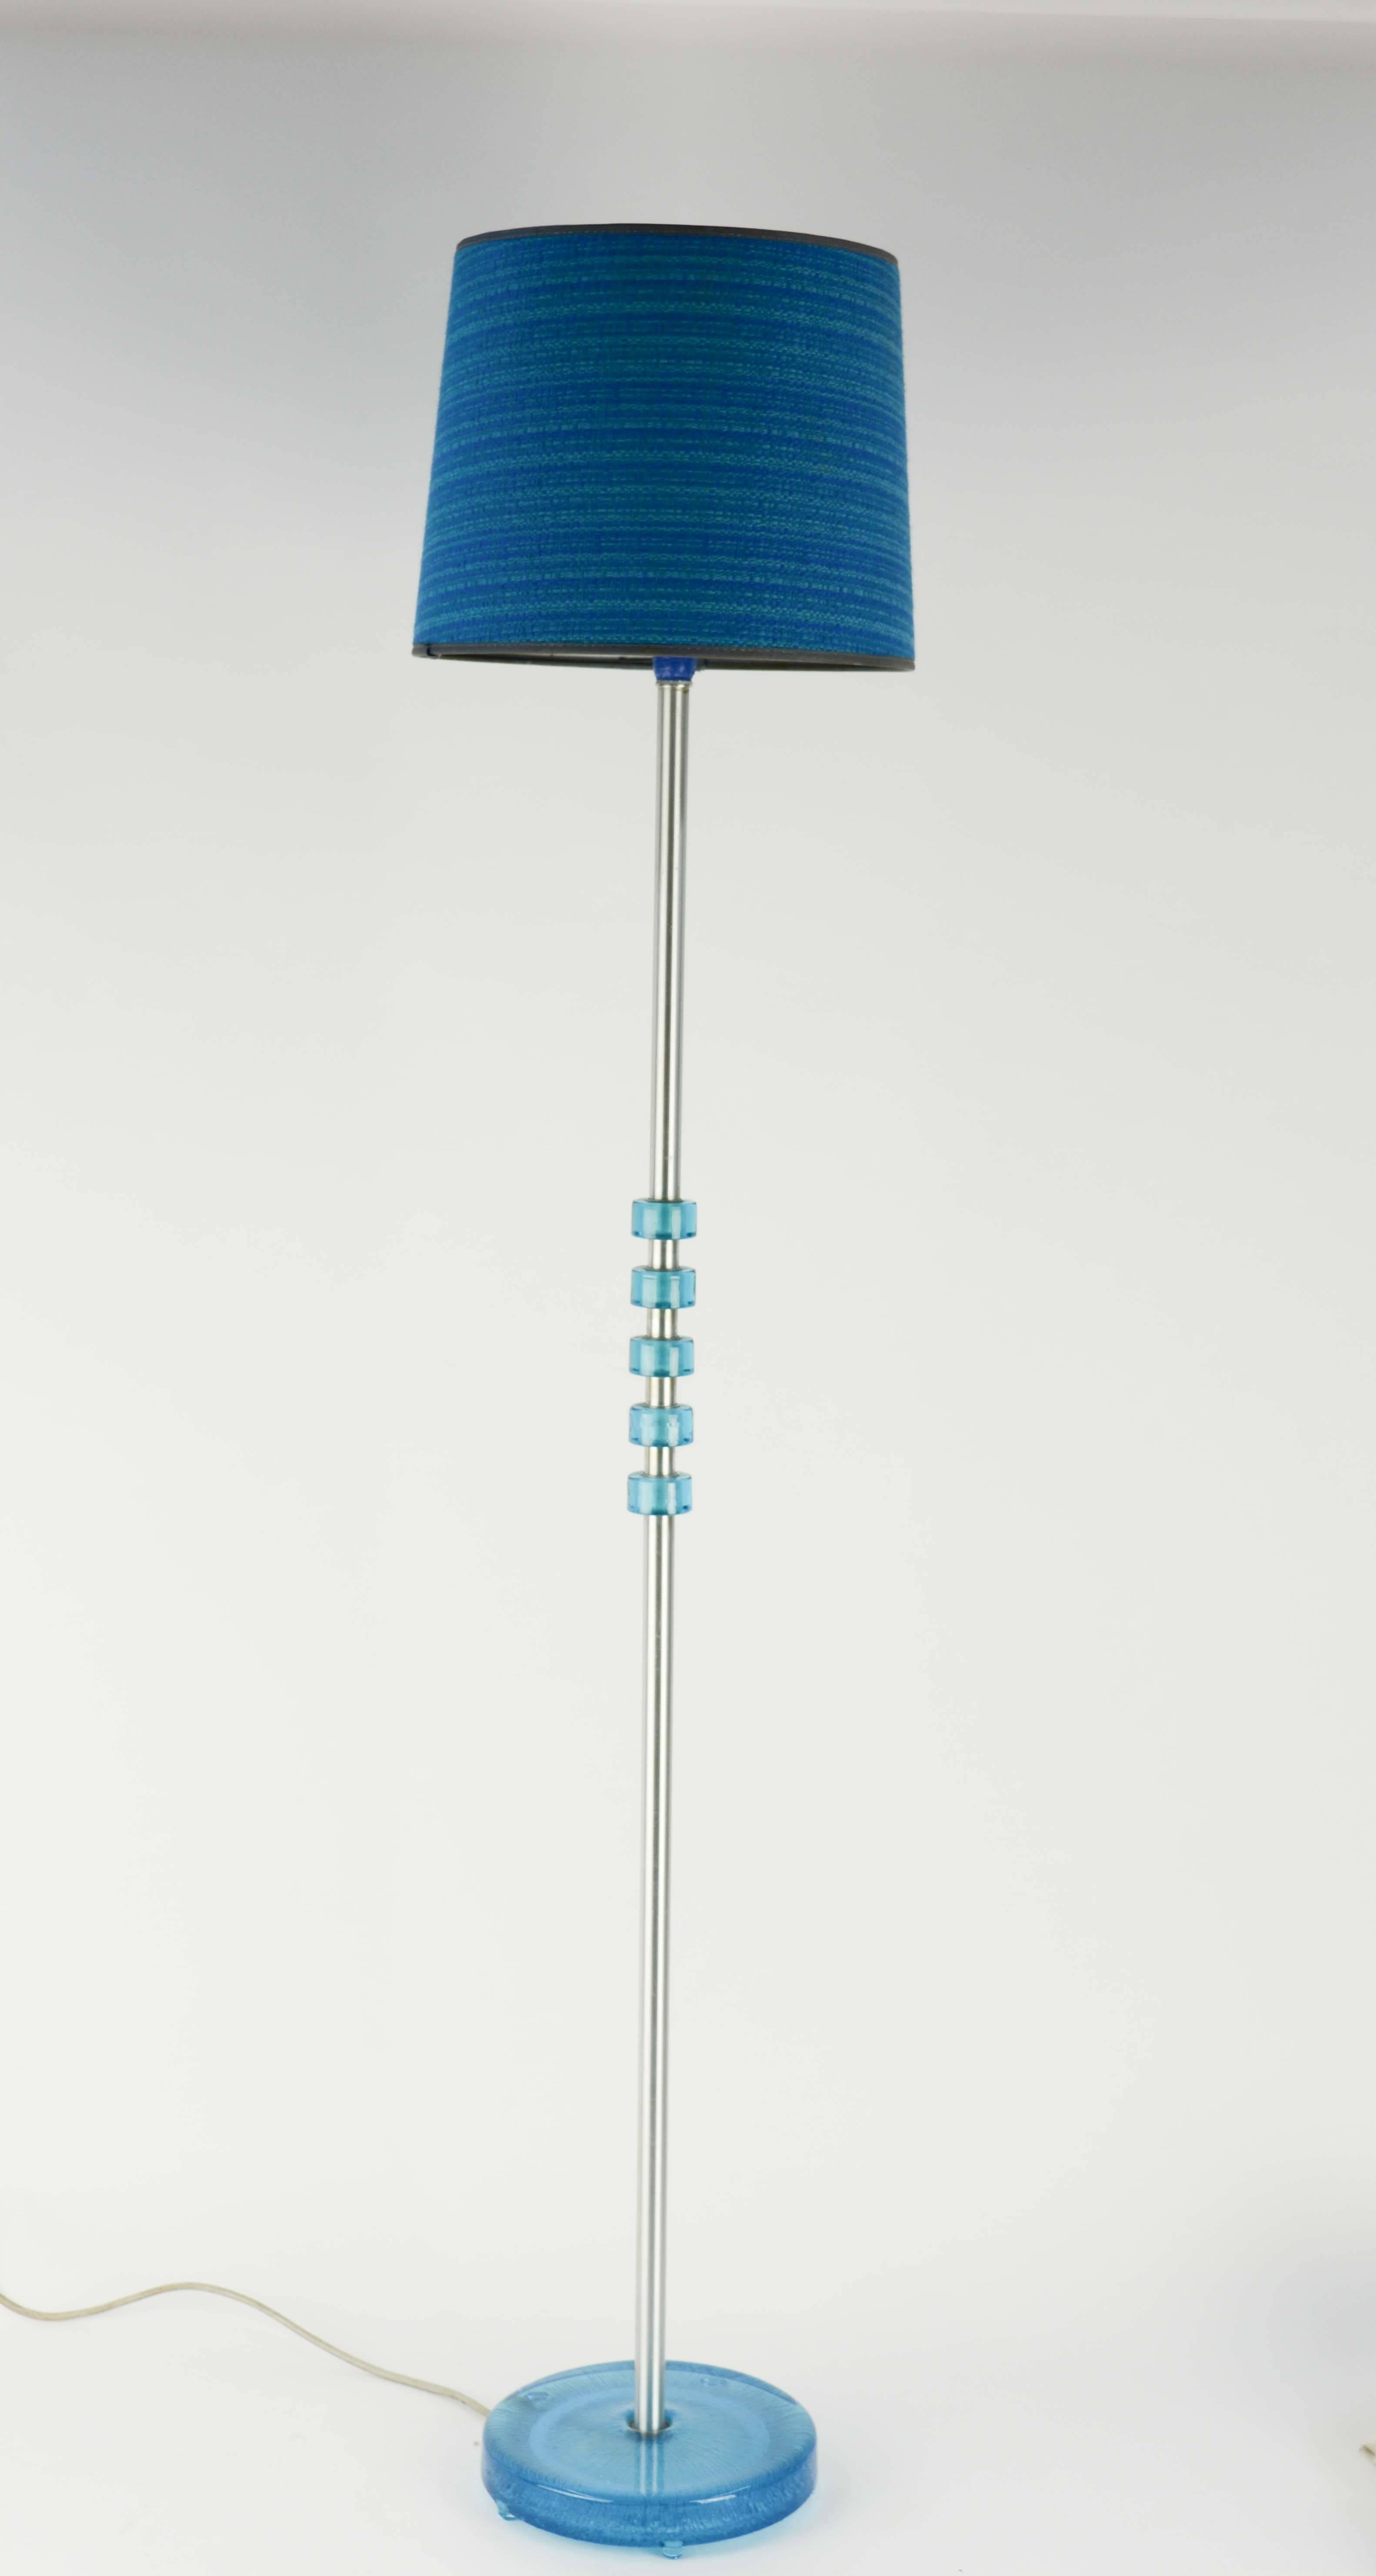 Floor lamp designed by Carl Fagerlund for Orrefors, Sweden, circa 1970. Model RD 1990. The original shade is 11.5